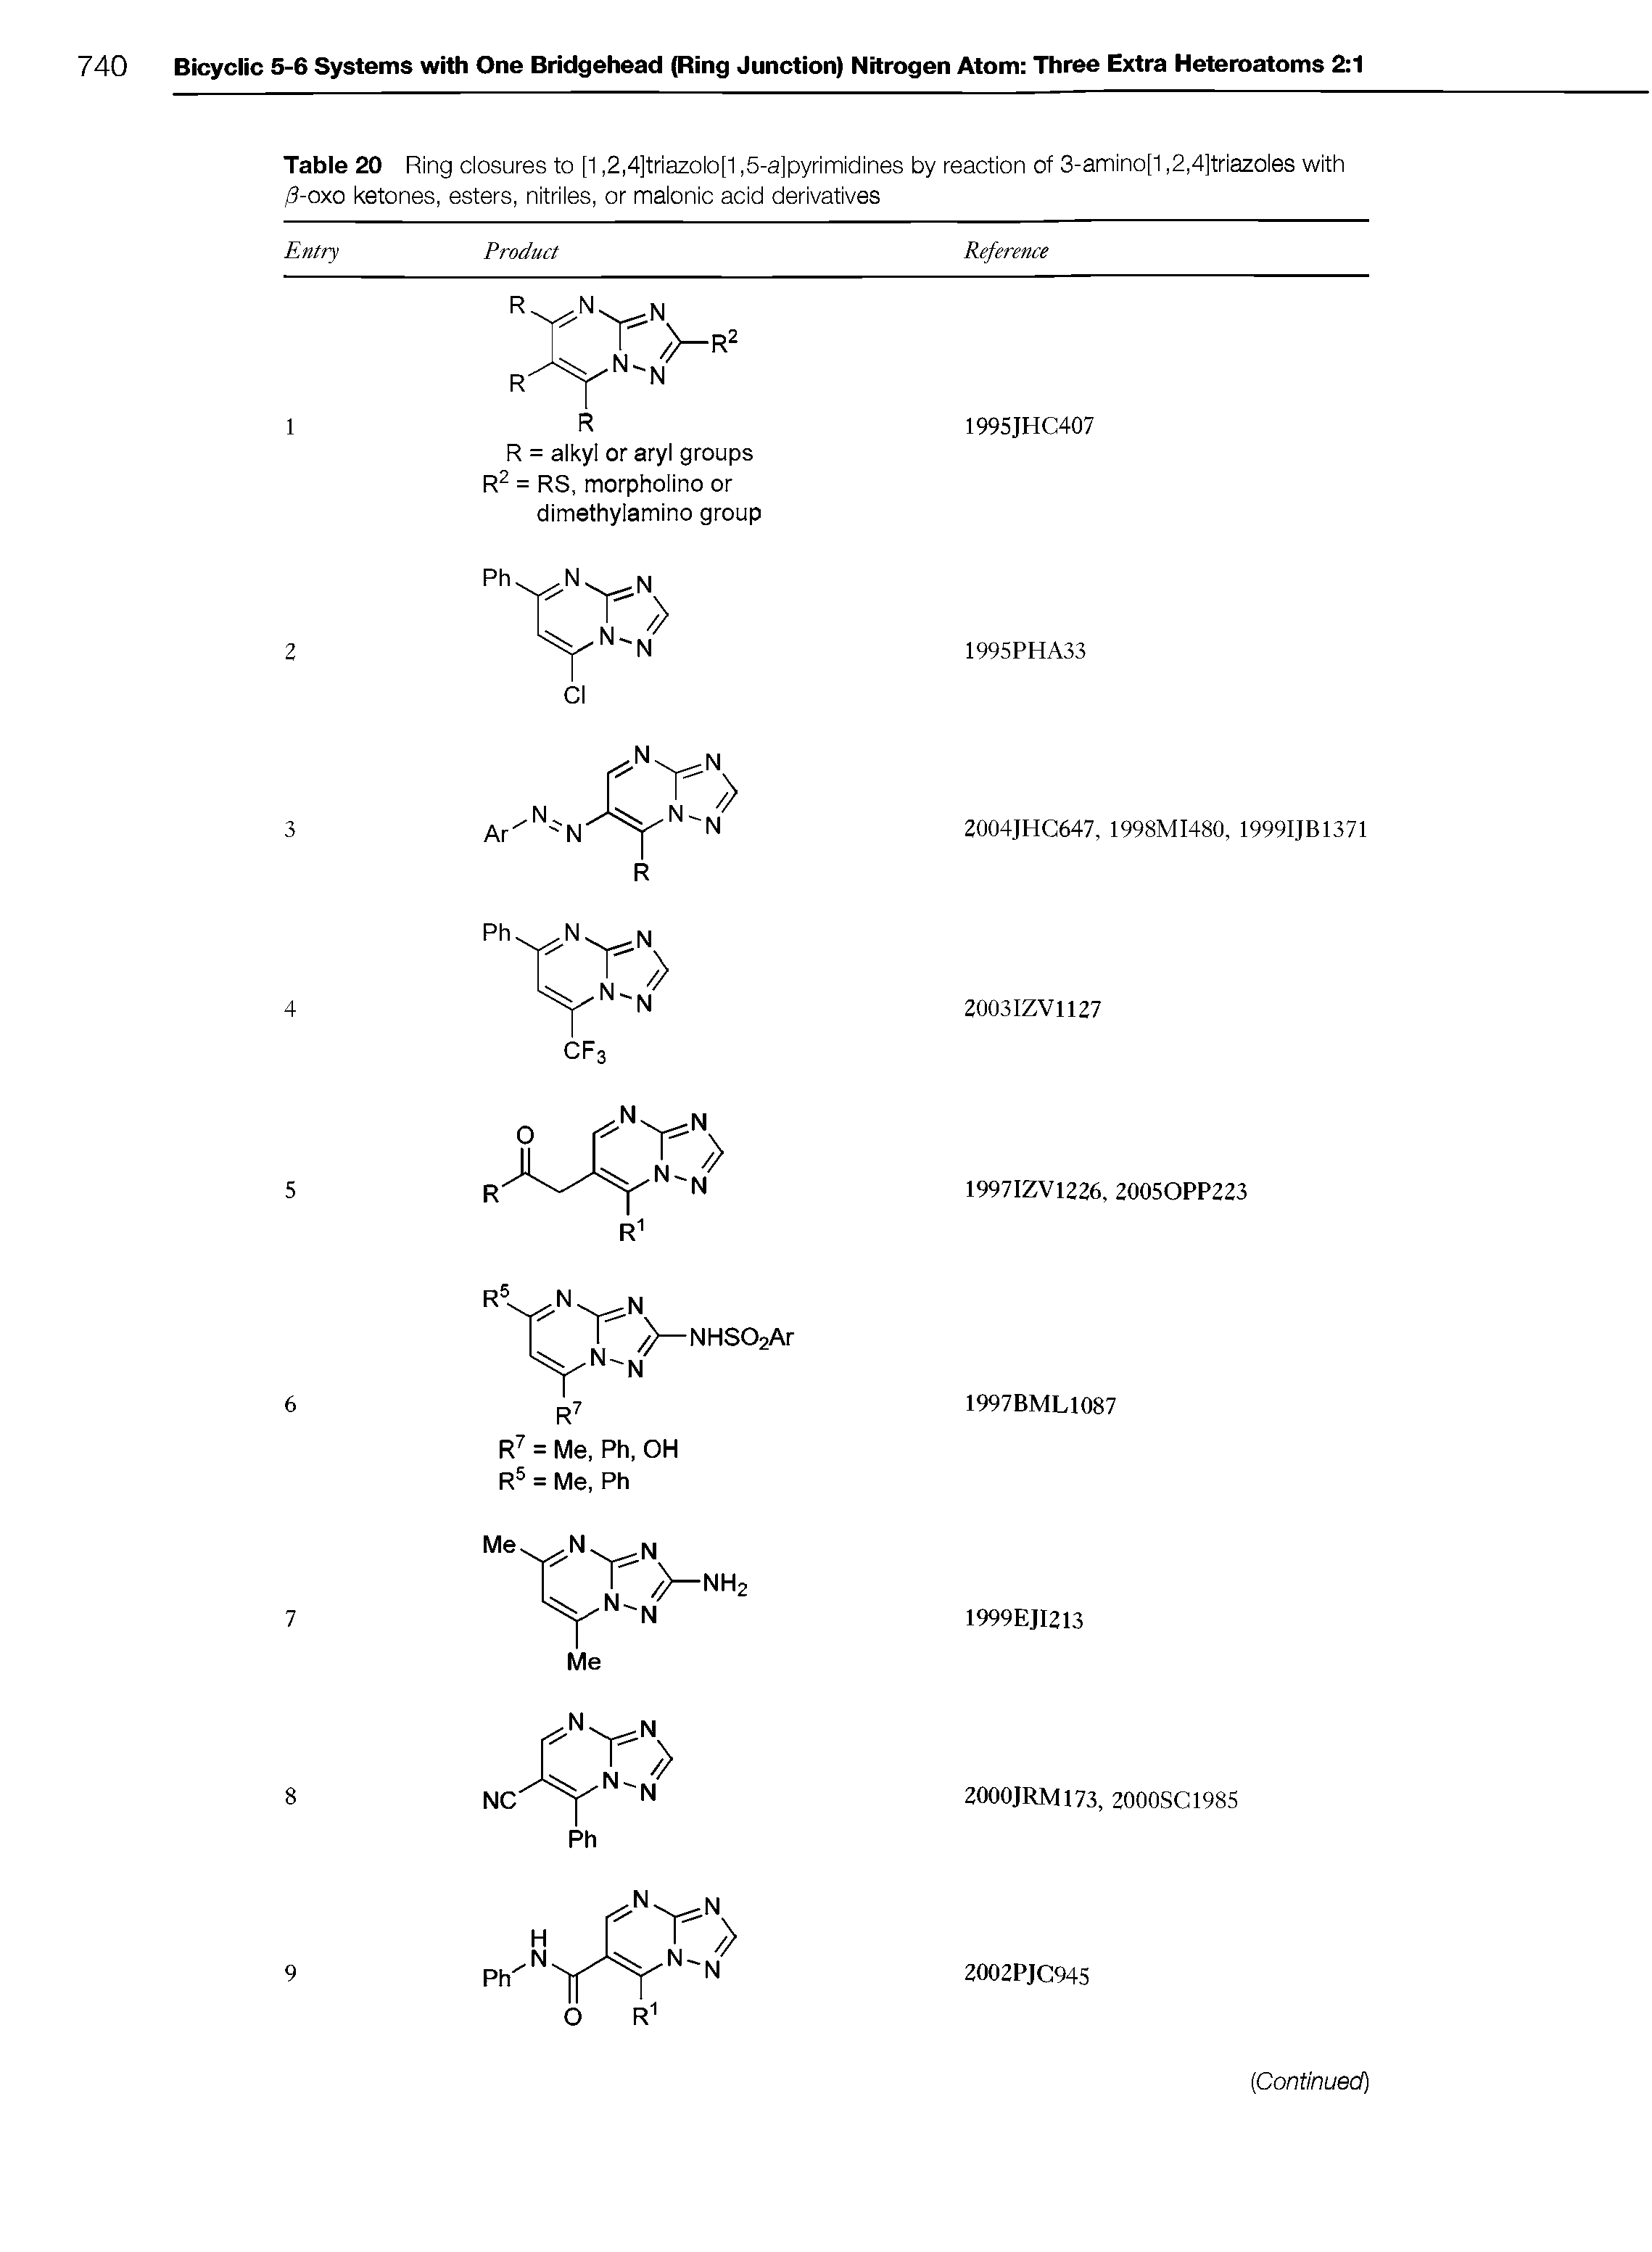 Table 20 Ring closures to [1,2,4]triazolo[1,5-a]pyrimidines by reaction of 3-amino[1,2,4]triazoles with /3-oxo ketones, esters, nitriles, or malonic acid derivatives...